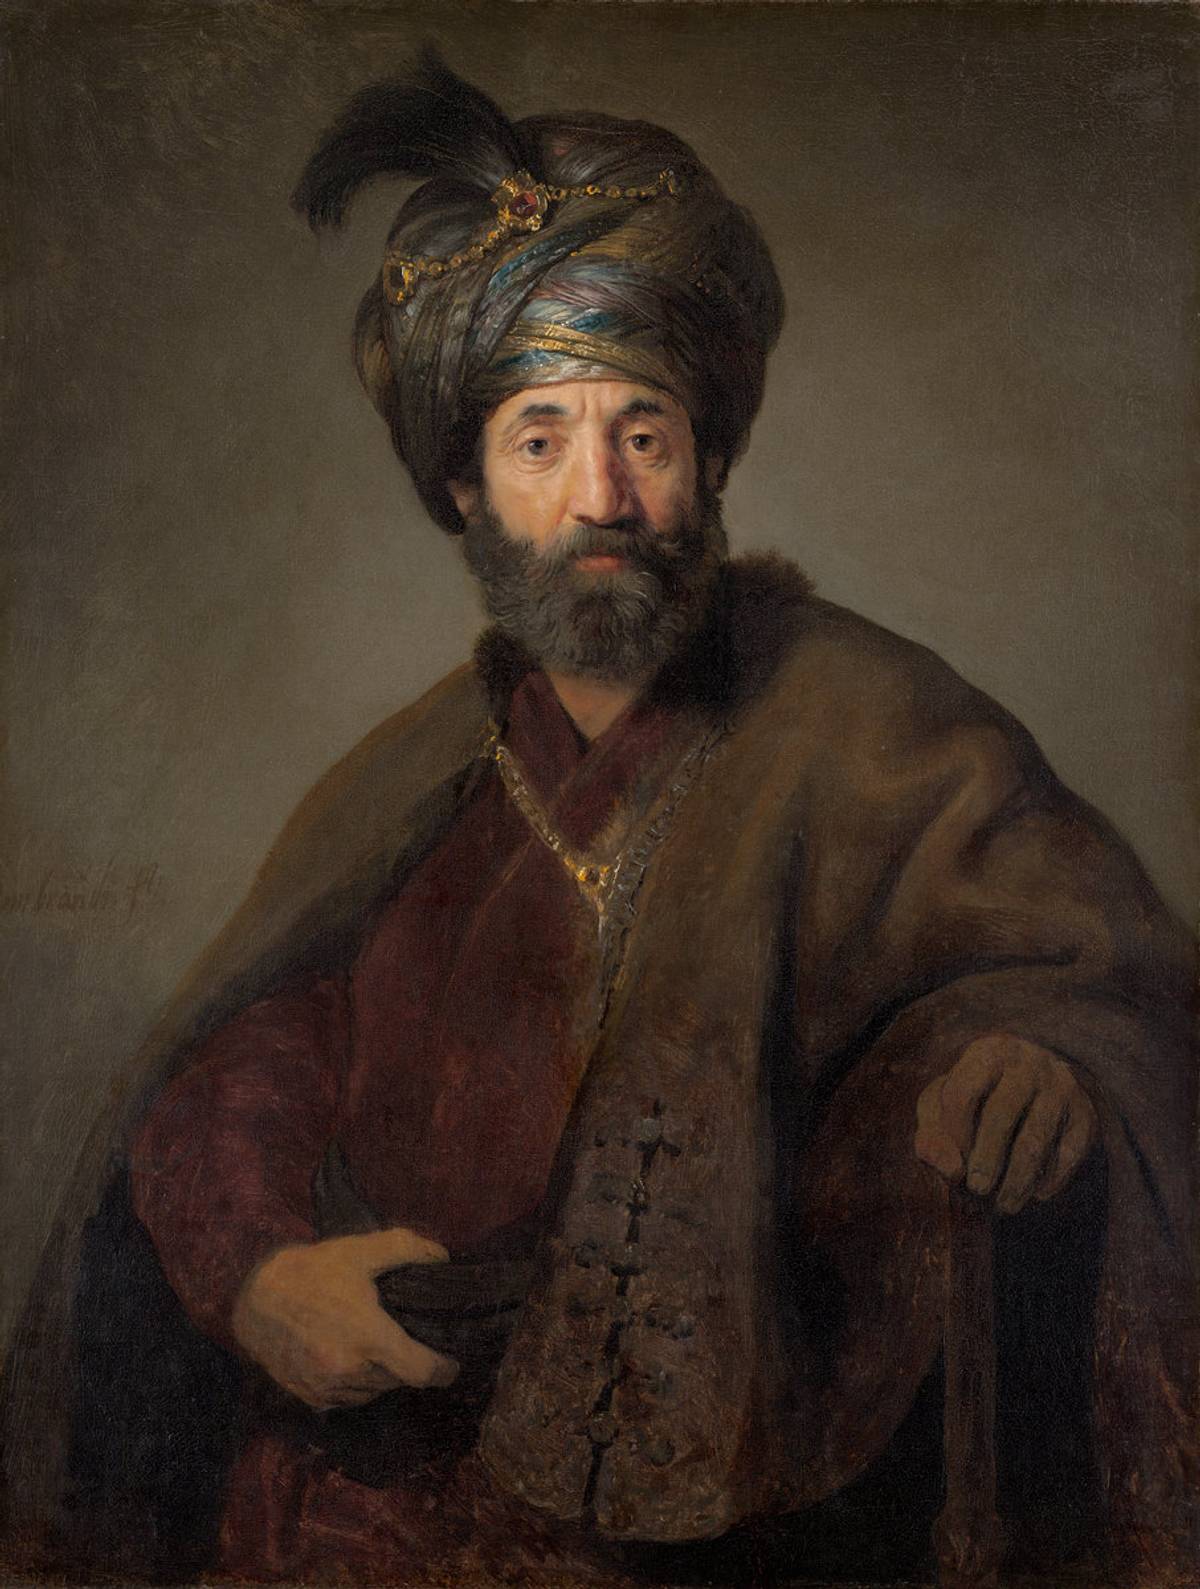 Rembrandt van Rijn and workshop (probably Govaert Flinck), 'Man in Oriental Costume,' circa 1635, thought to be Samuel Pallache